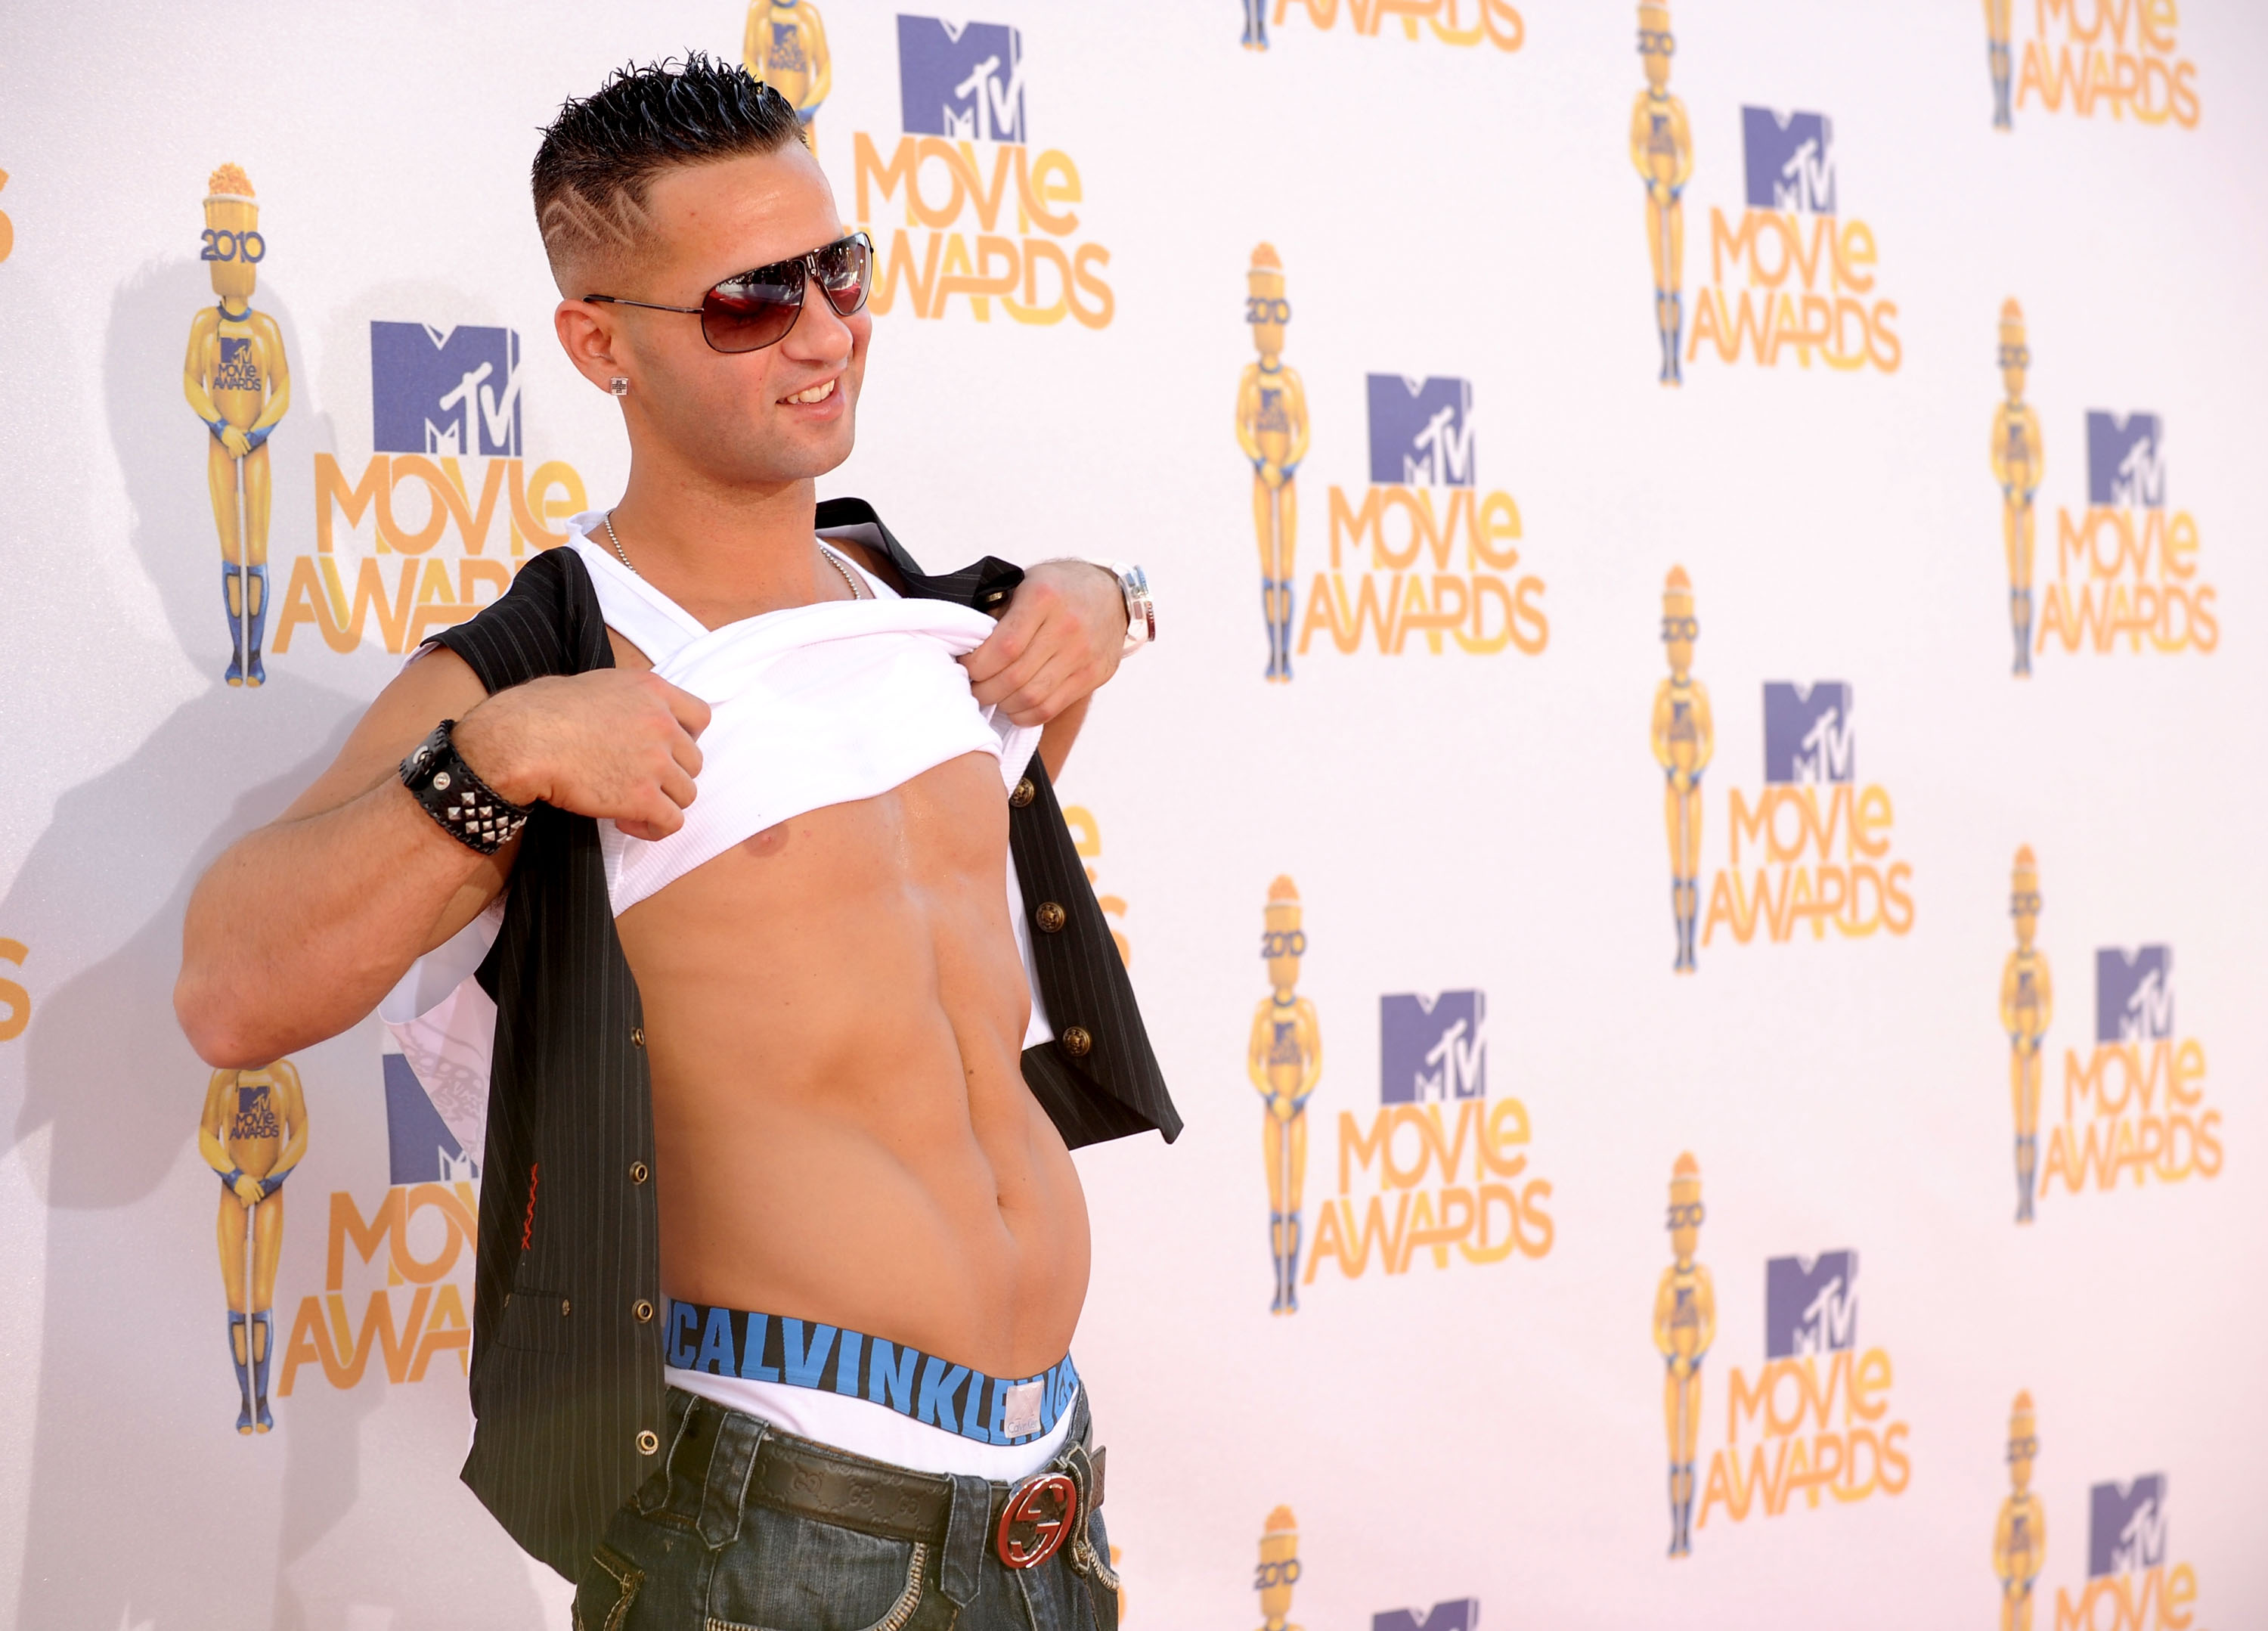 'Jersey Shore' star Mike 'The Situation' Sorrentino showing off his model physique at the 2010 MTV Movie Awards